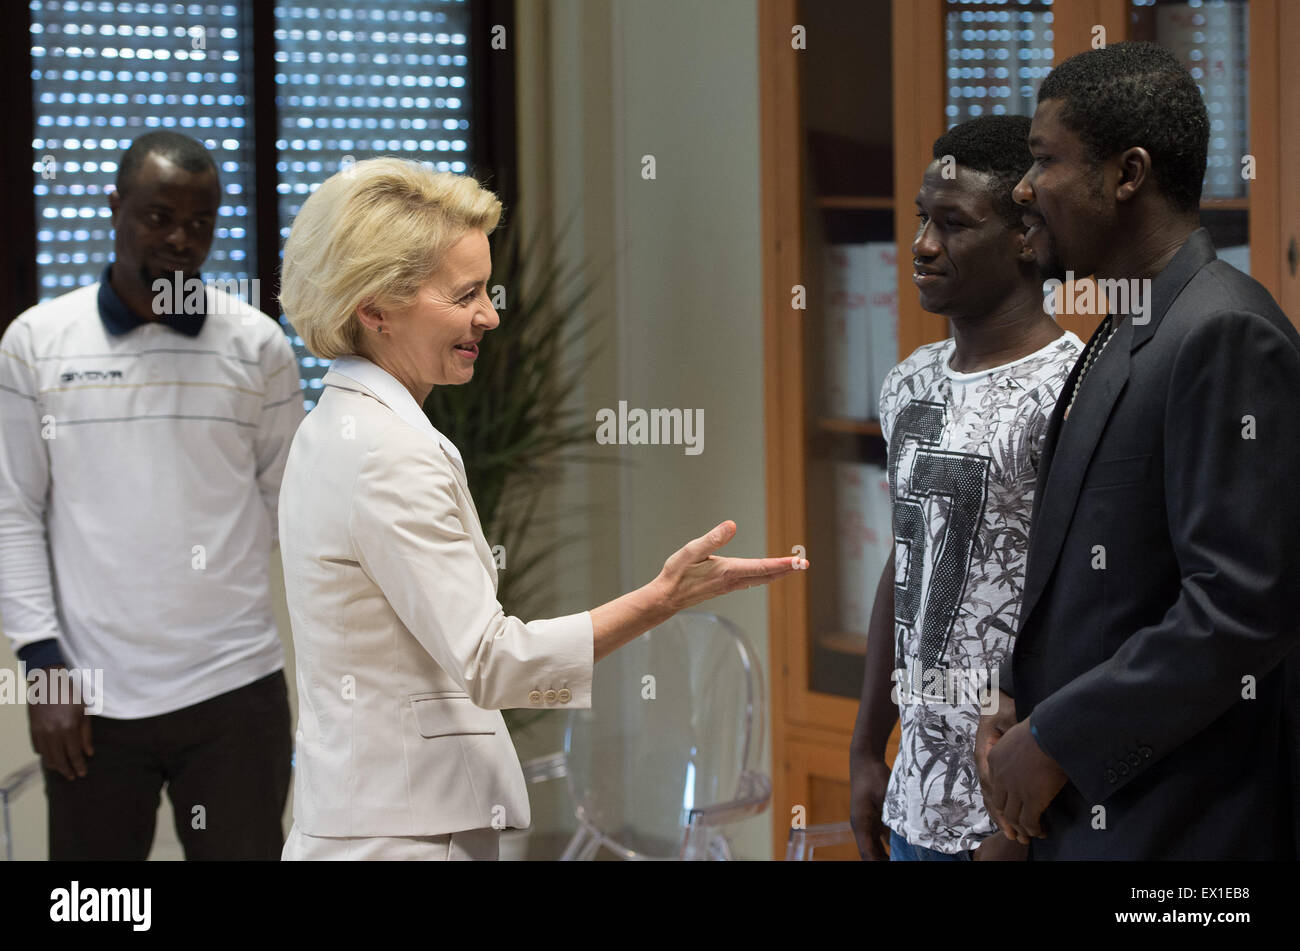 Sicily, Italy. 4th July, 2015. German Defence Minister Ursula von der Leyen (CDU) speaks with refugees from Nigeria and Gambia before her visit to the "Seenotrettung MED" (lit. sea rescue MED) Bundeswehr mission, off the coast of Sicily, Italy, 4 July 2015. Photo: SOEREN STACHE/DPA/Alamy Live News Stock Photo